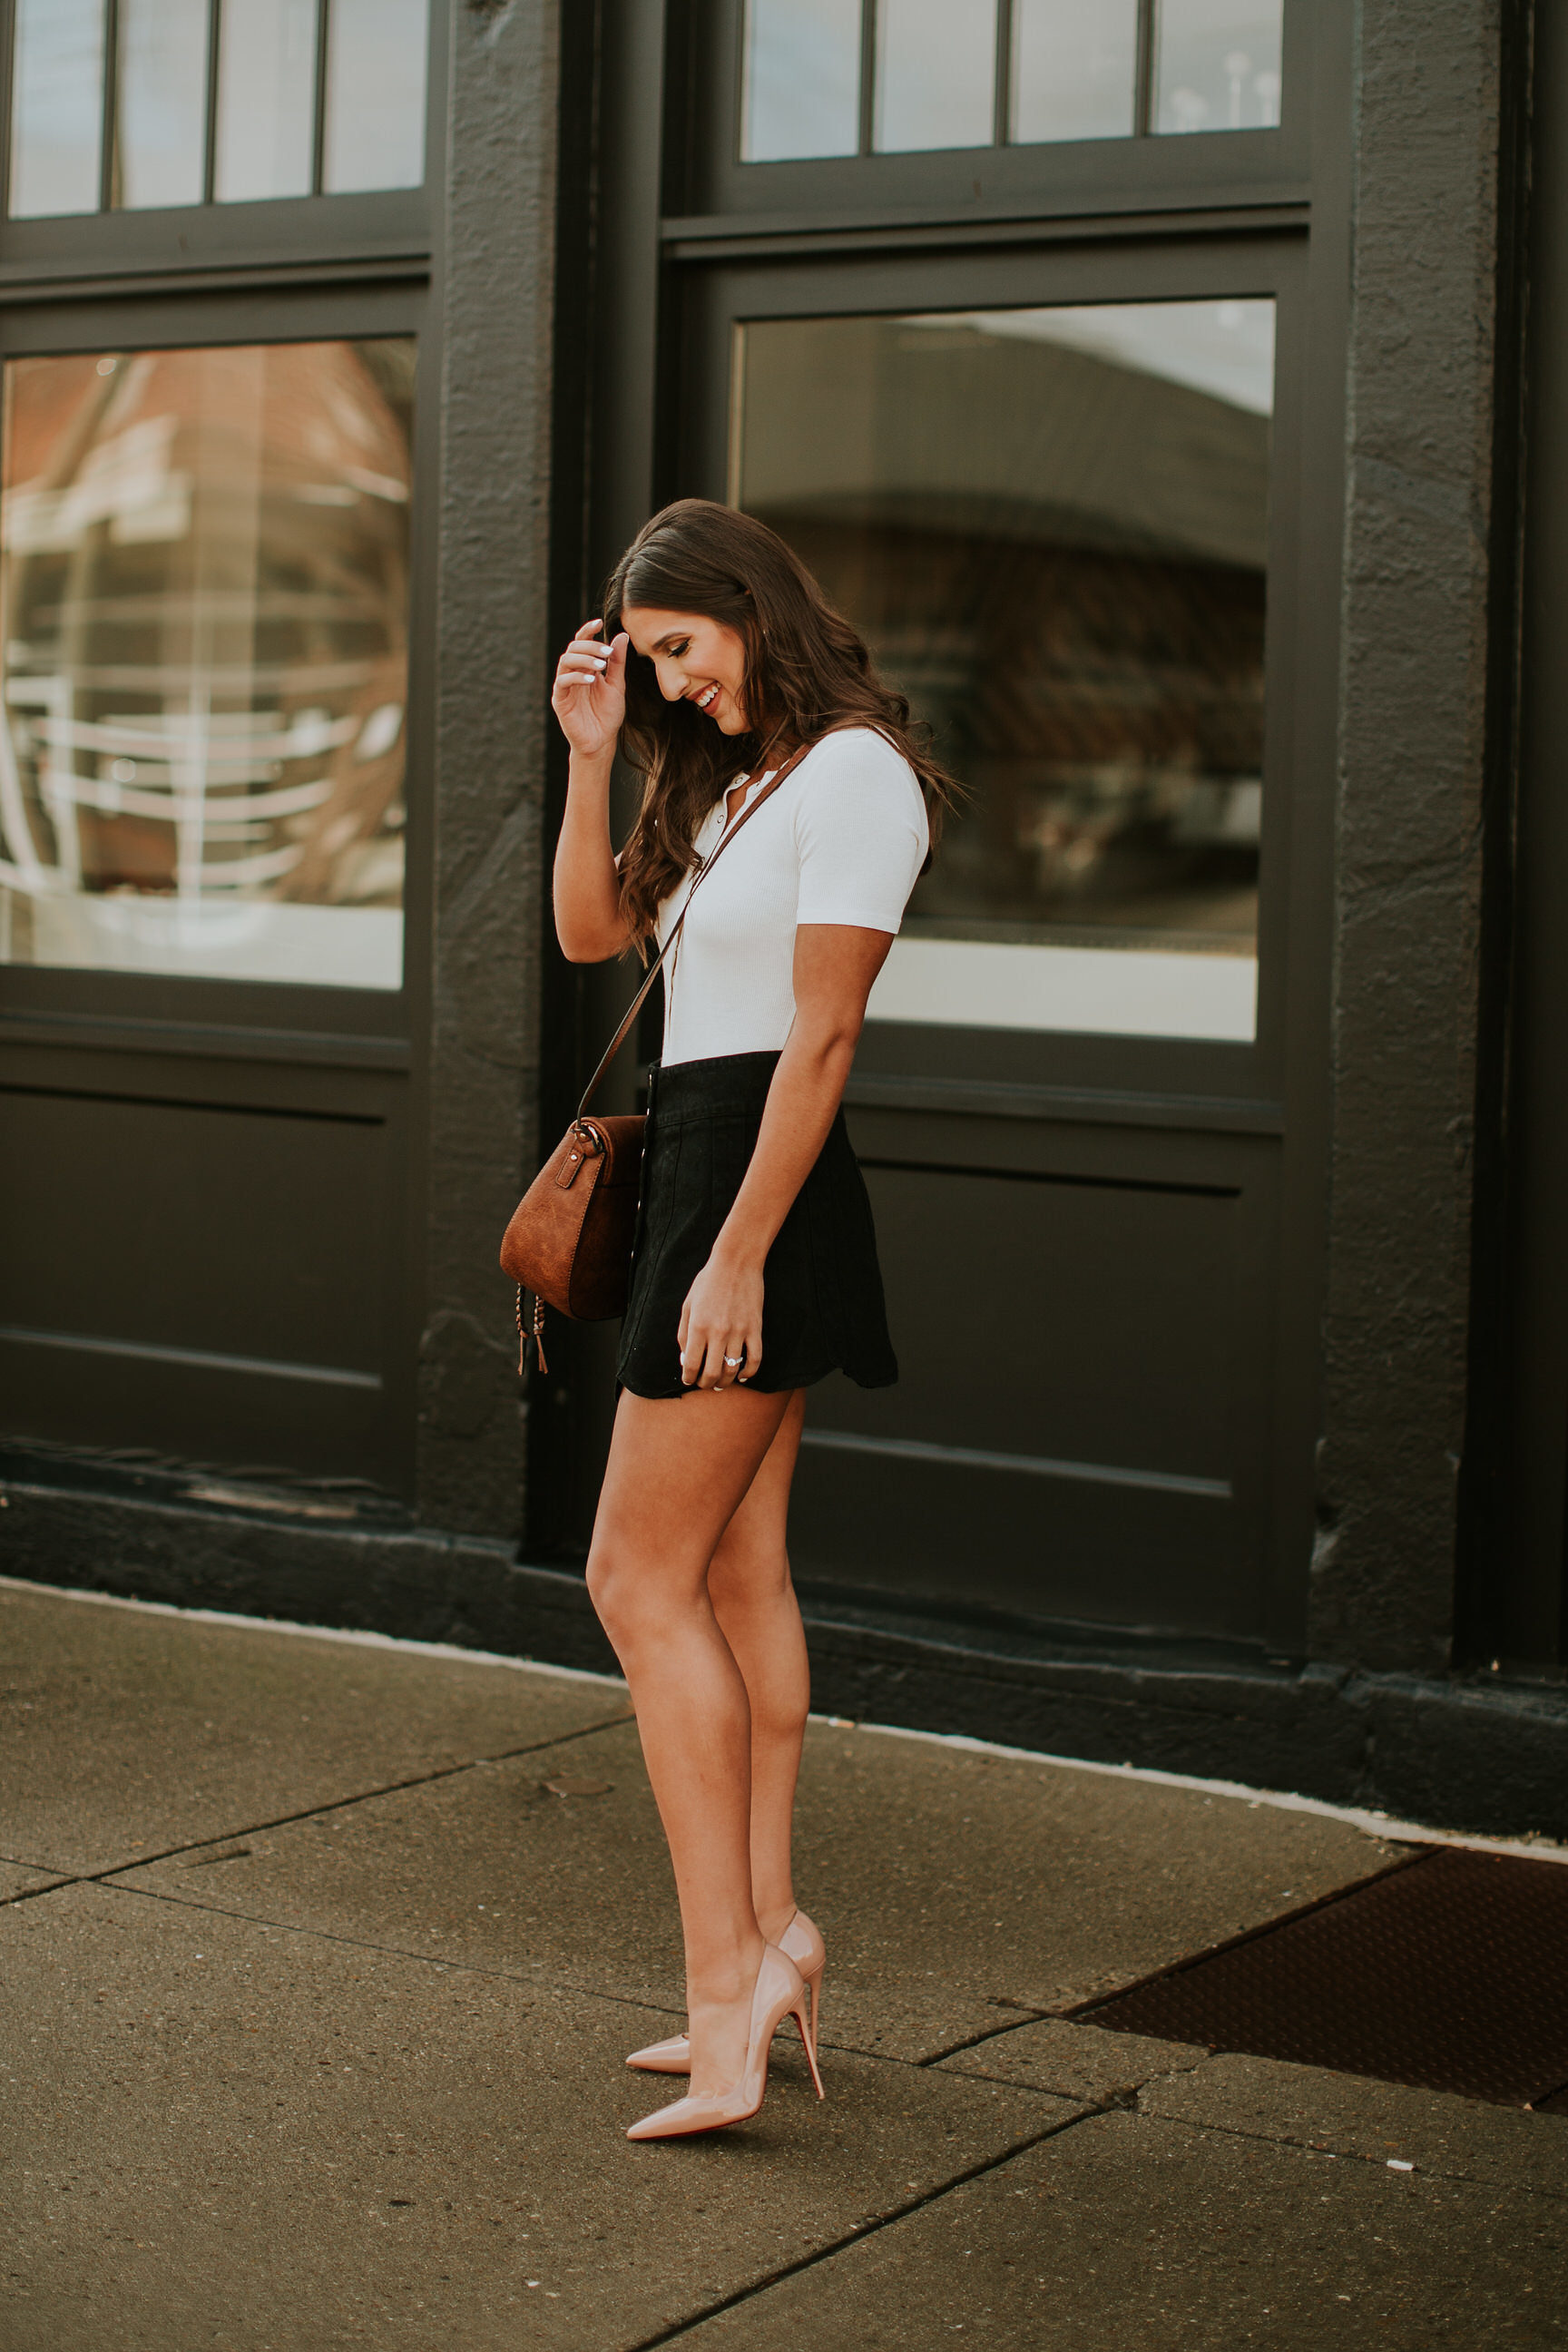 scallop denim skirt, understated leather skirt, denim skirt, jean skirt, tee bodysuit, privacy please, christian louboutin so kate pumps, sole society saddle bag, sole society purse, sole society bags, casual style, feminine style // grace wainwright a southern drawl